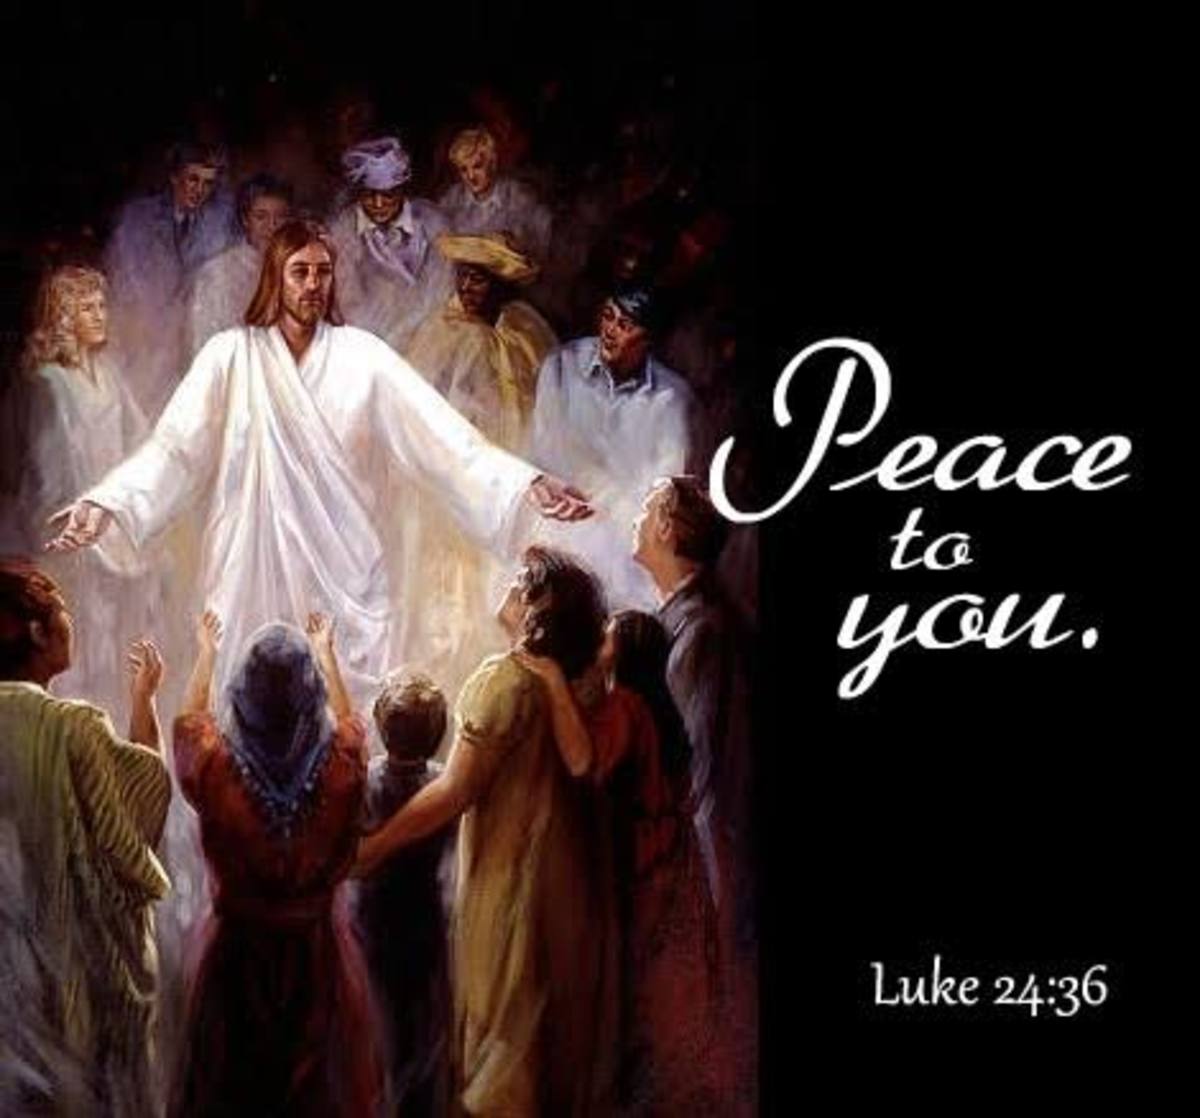 peace-be-with-you-literary-context-and-analysis-of-luke-chapter-24-36-49